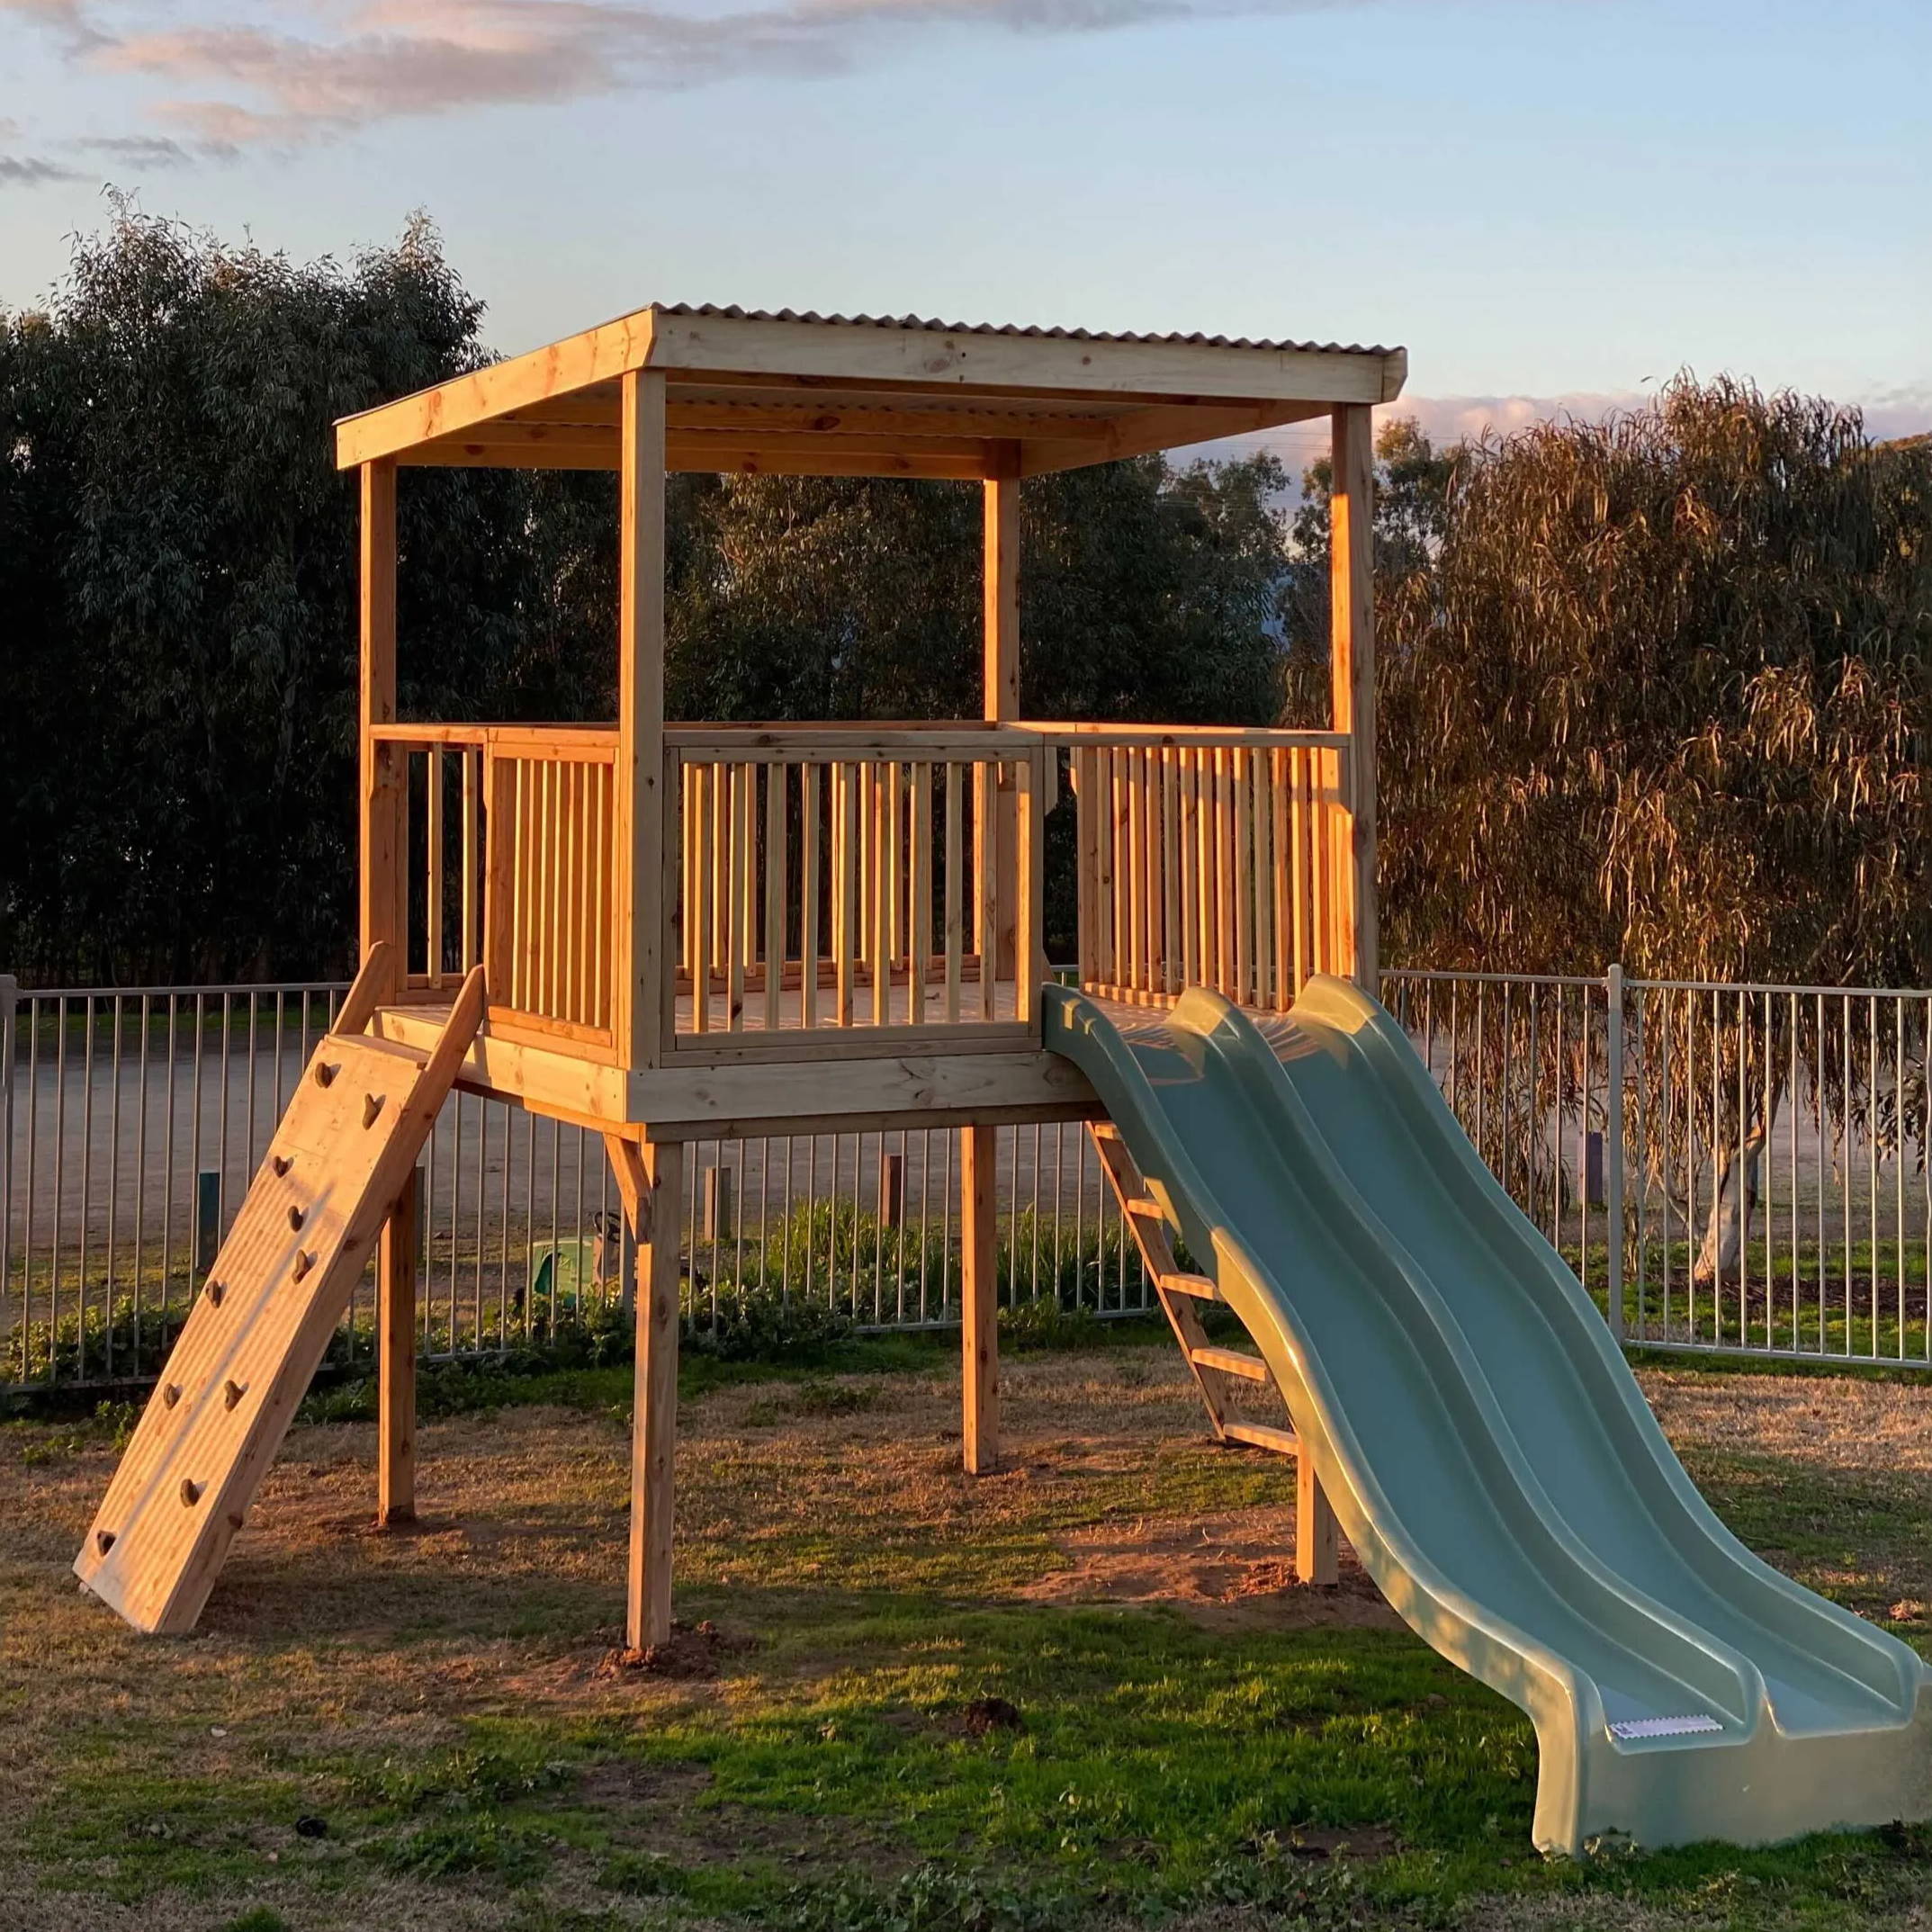 A raised platform cubby houses with a ladder and slides